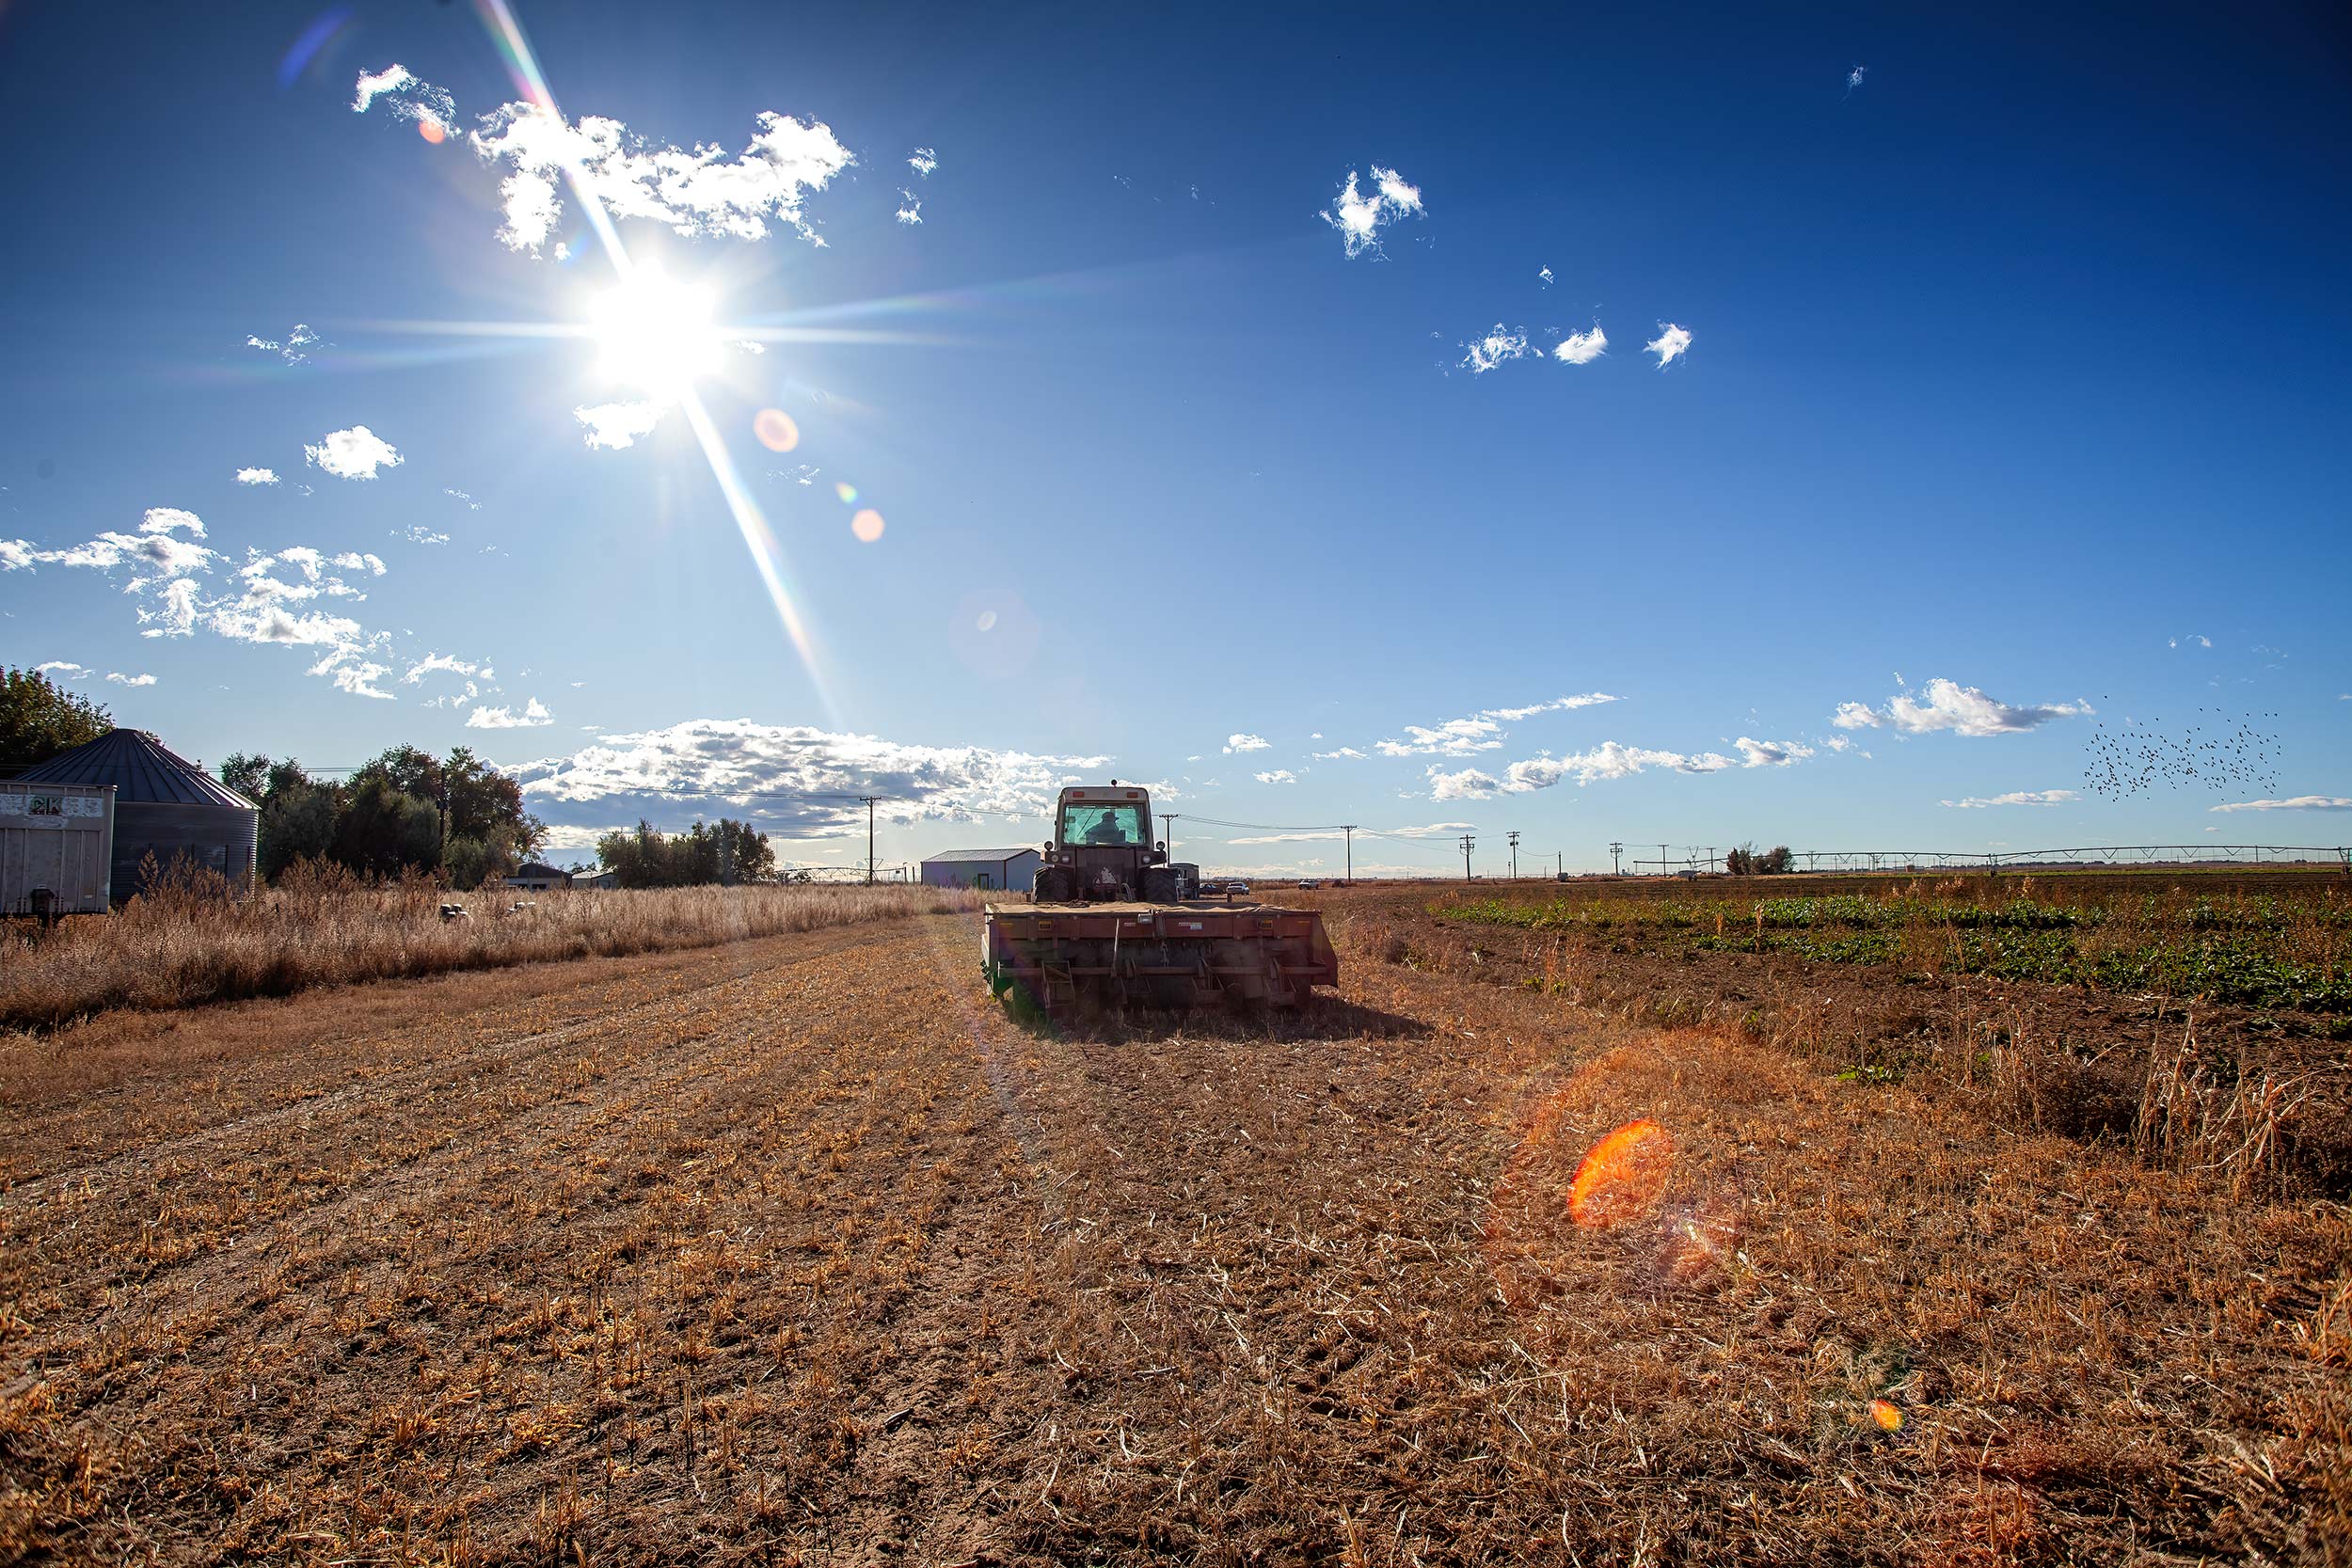 A tractor finishing harvest in crop field on a sunny blue sky day.  